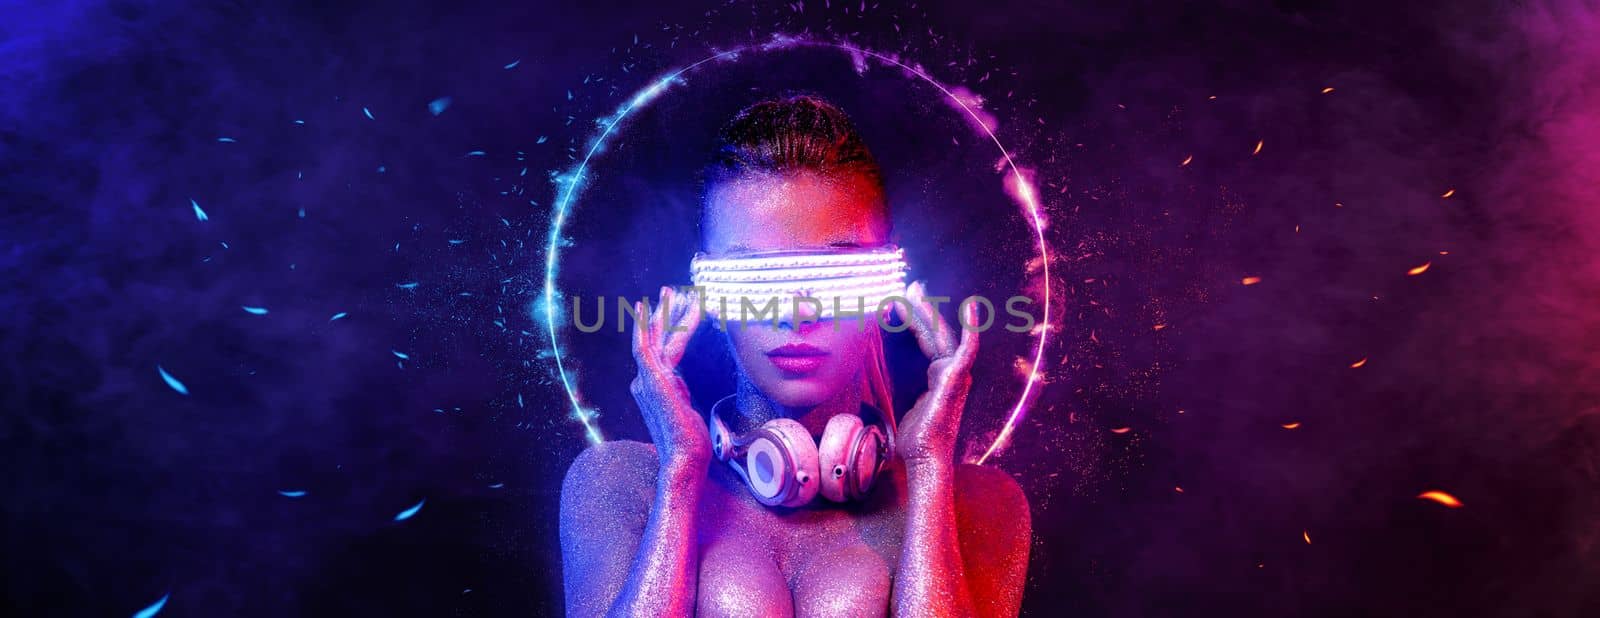 Cyber monday concept. Hot girl DJ in neon lights with headphones. Sexy TDJ at night club party. Mixtape cover design - download high resolution picture for your song cover. Album template. by MikeOrlov